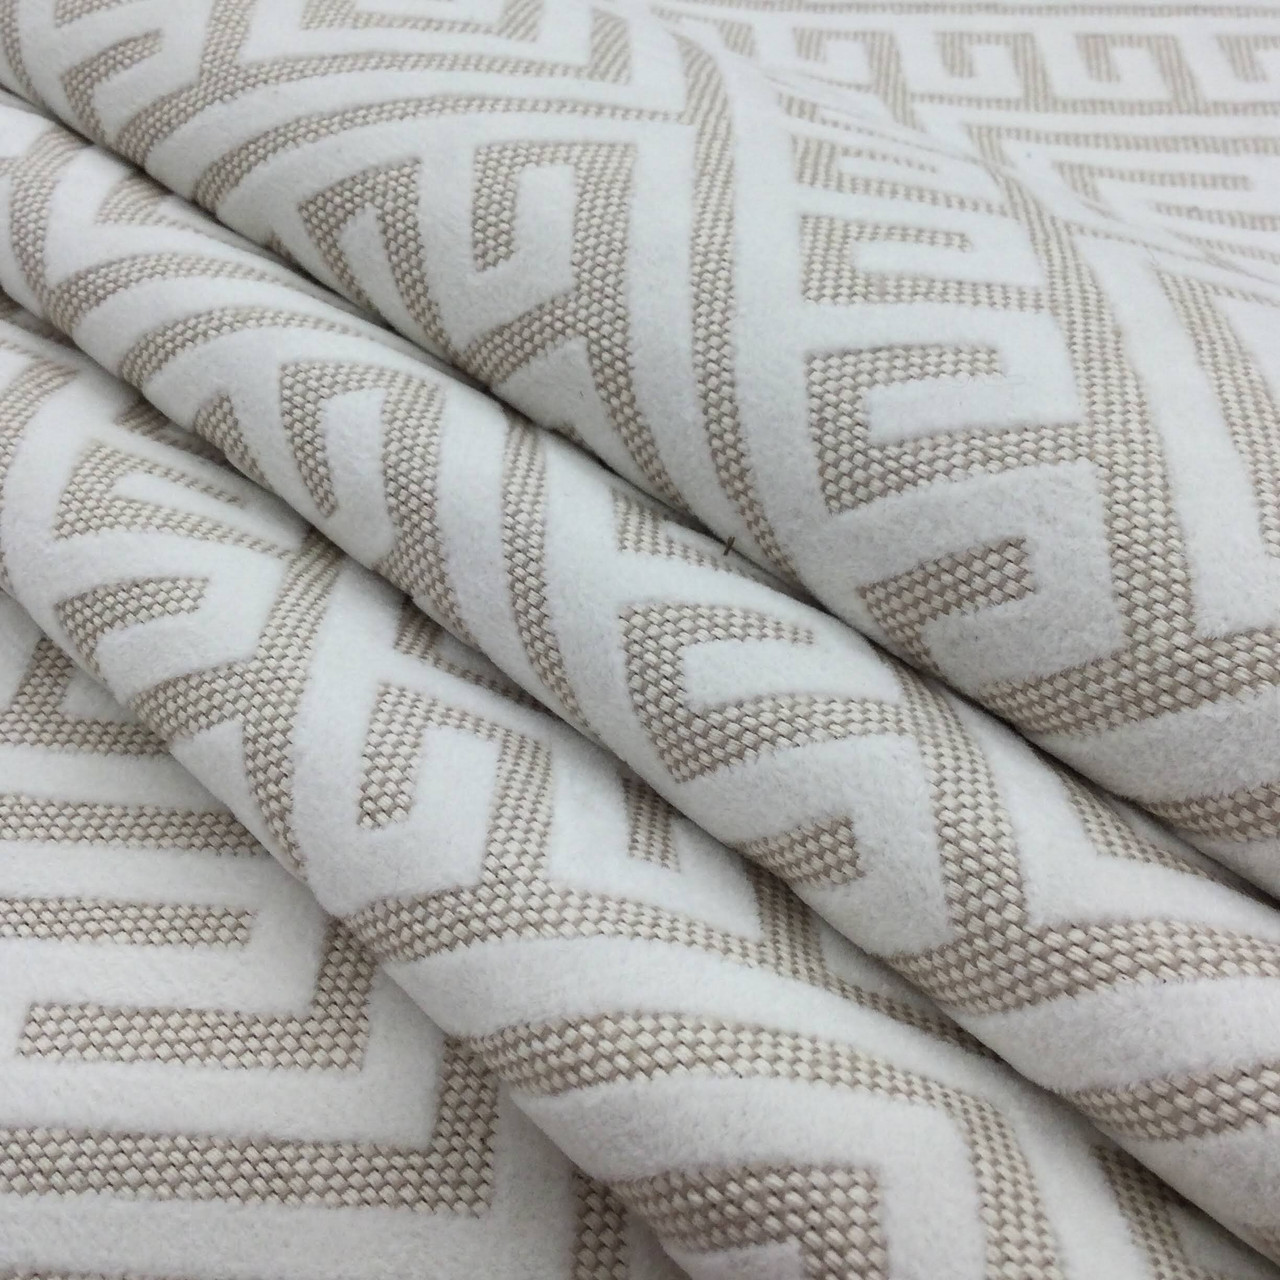 Feelyou Geometric Upholstery Fabric for Chairs, Geometry Greek Key Fabric  by The Yard, Maze Design Decorative Abstract Art Fabric for Upholstery and